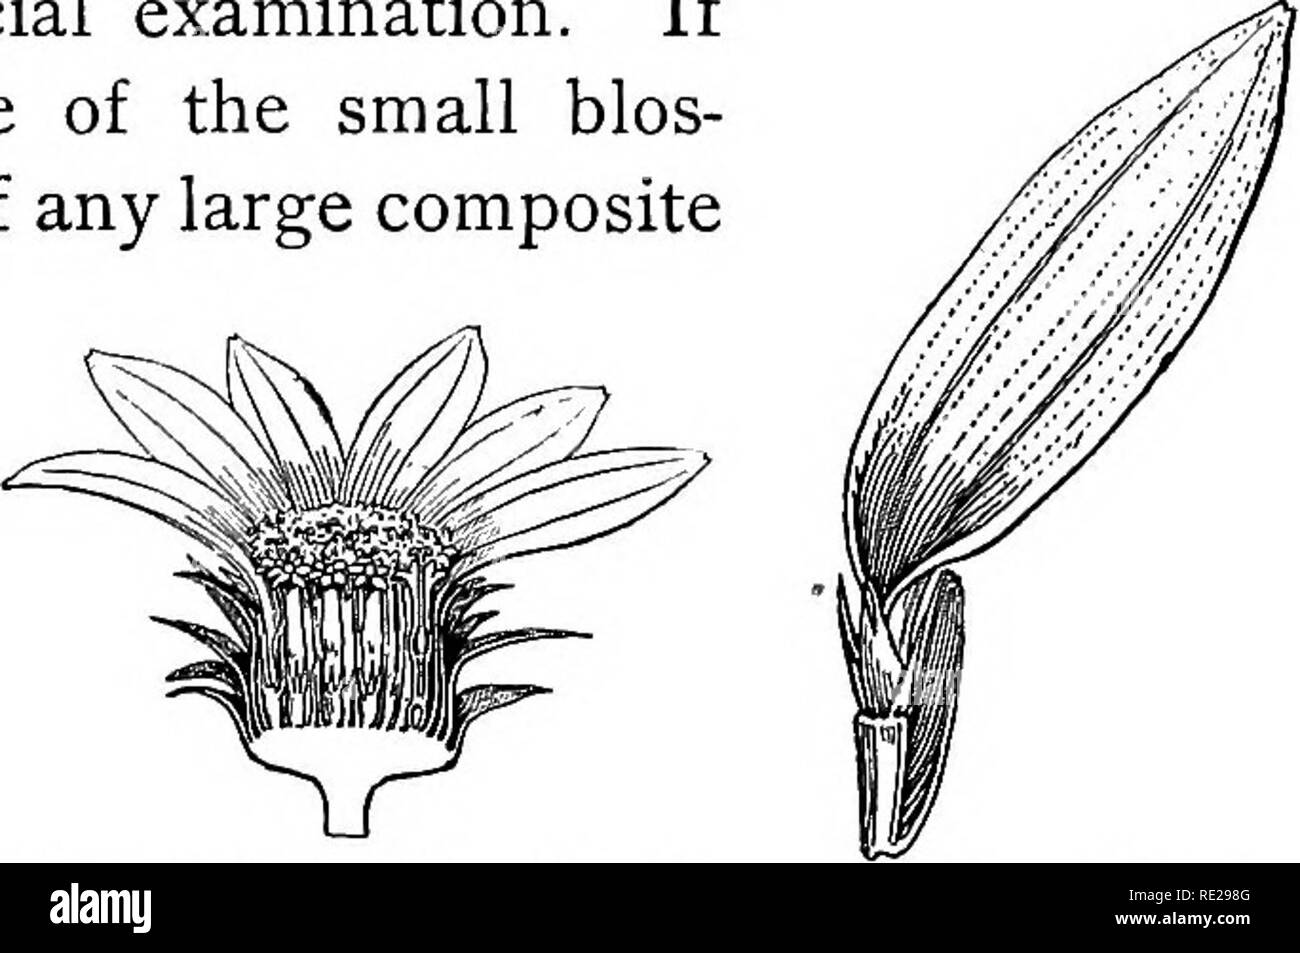 . Botany all the year round; a practical text-book for schools. Botany. THE COROLLA 215. 307. The Ligulate, or strap-shaped corolla, seen in the rays of the sunflower family, is of such frequent occurrence as to deserve a special examination. If you will remove one of the small blos- soms from the disk of any large composite flower (Fig. 426) and imagine its corolla greatly en- larged and split open on the inner side, you will get a very good idea of 426. — a head of artichoke 427. — A ray flower of the nature of the ^°'&quot;'^'^ divided lengthwise. artichoke, enlarged. rays. The five little  Stock Photo